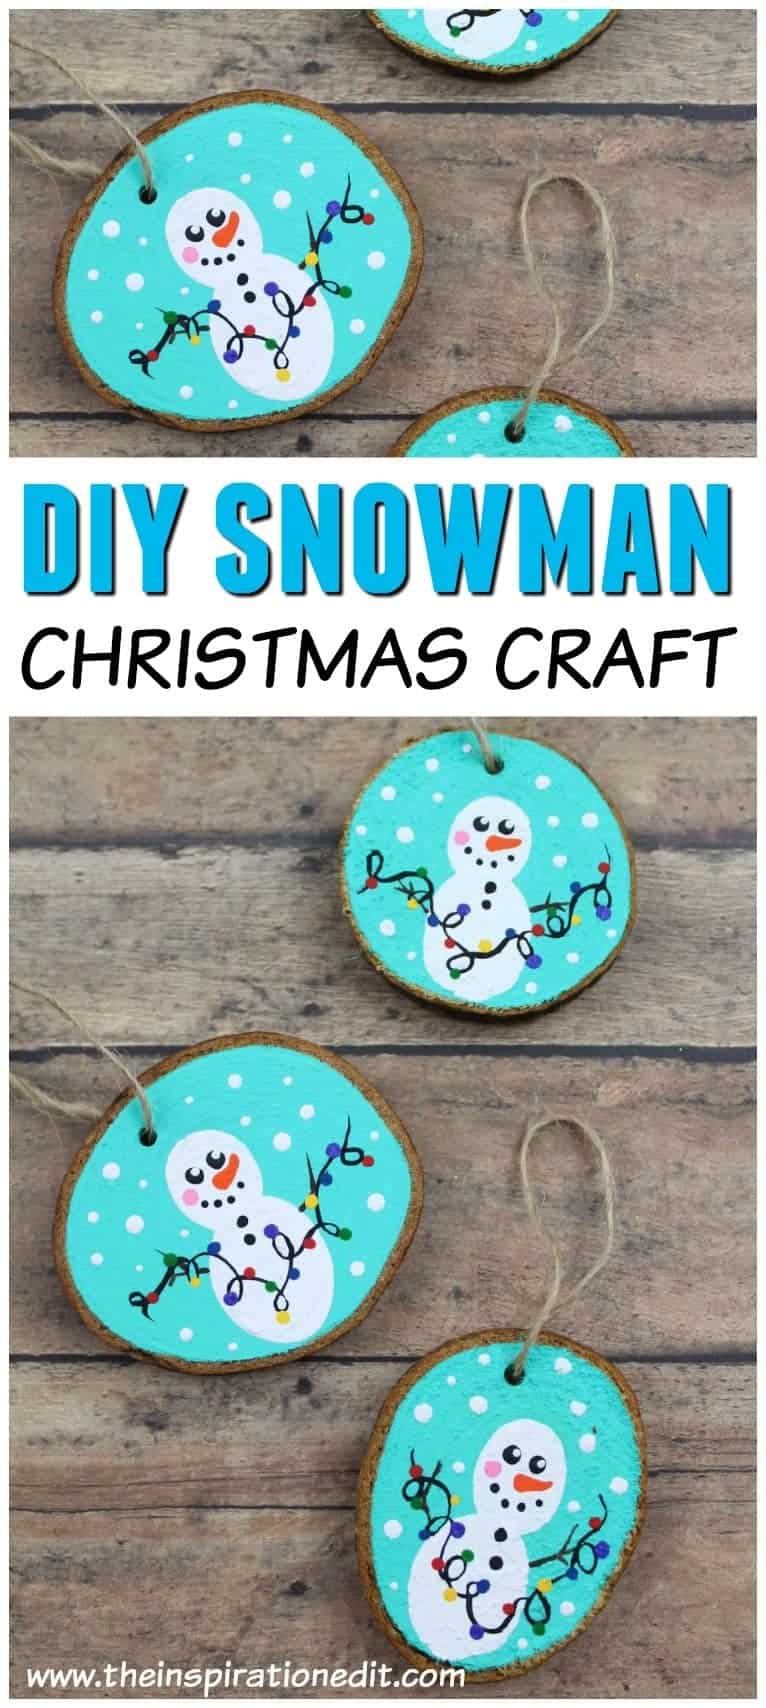 My List of 50 Favorite Christmas Craft Ideas | The Cagle Diaries